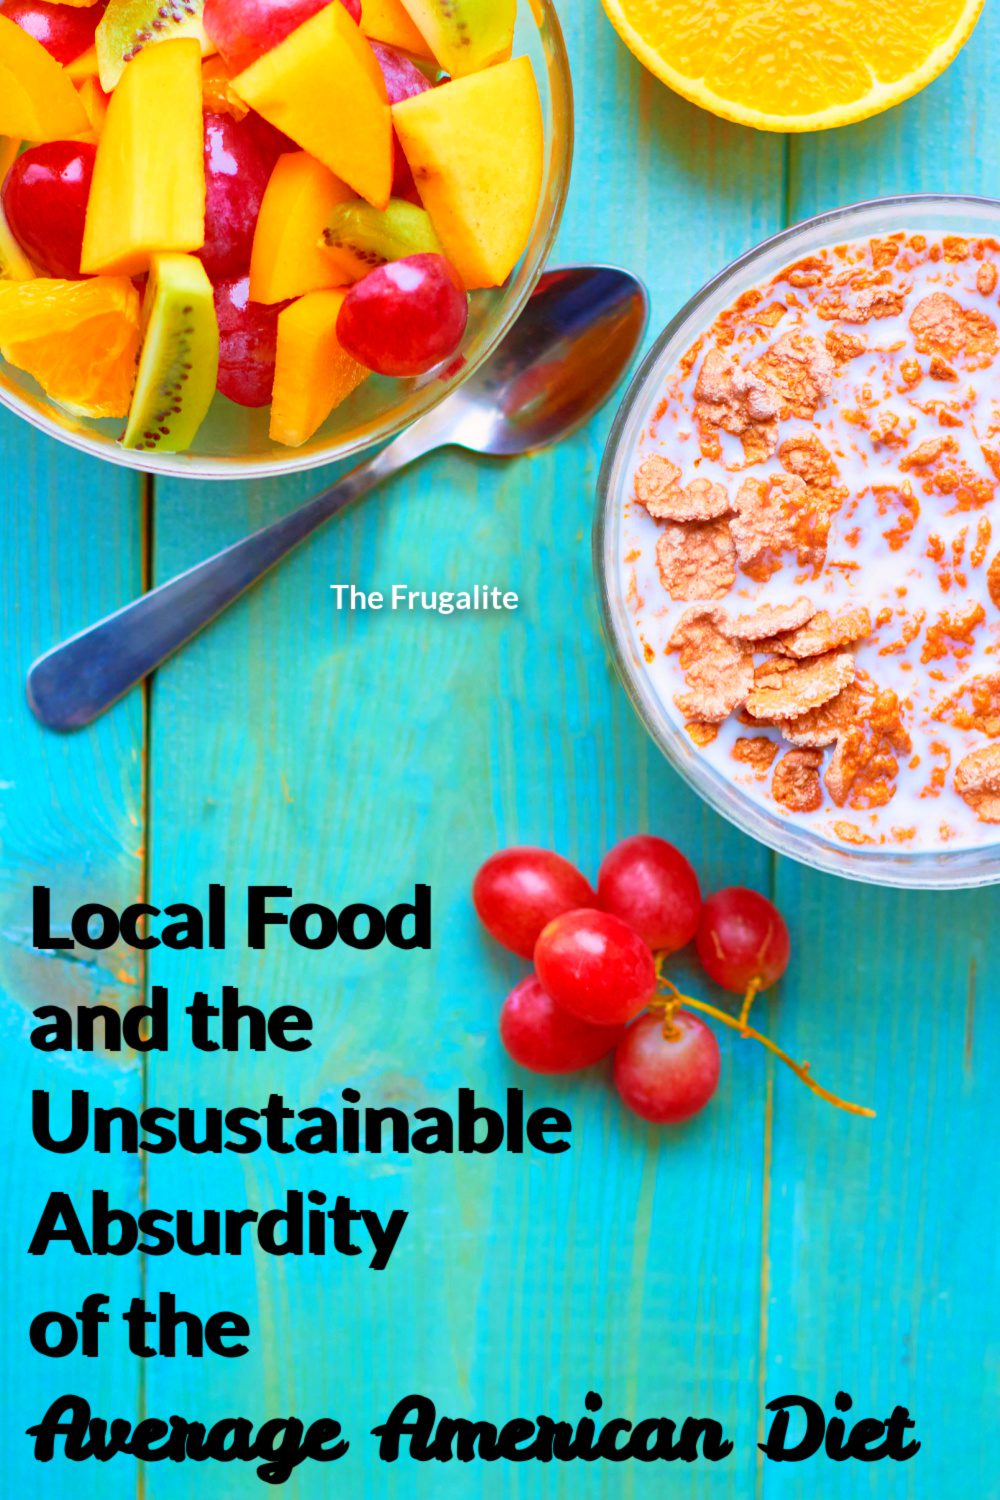 Local Food and the Unsustainable Absurdity of the Average American Diet